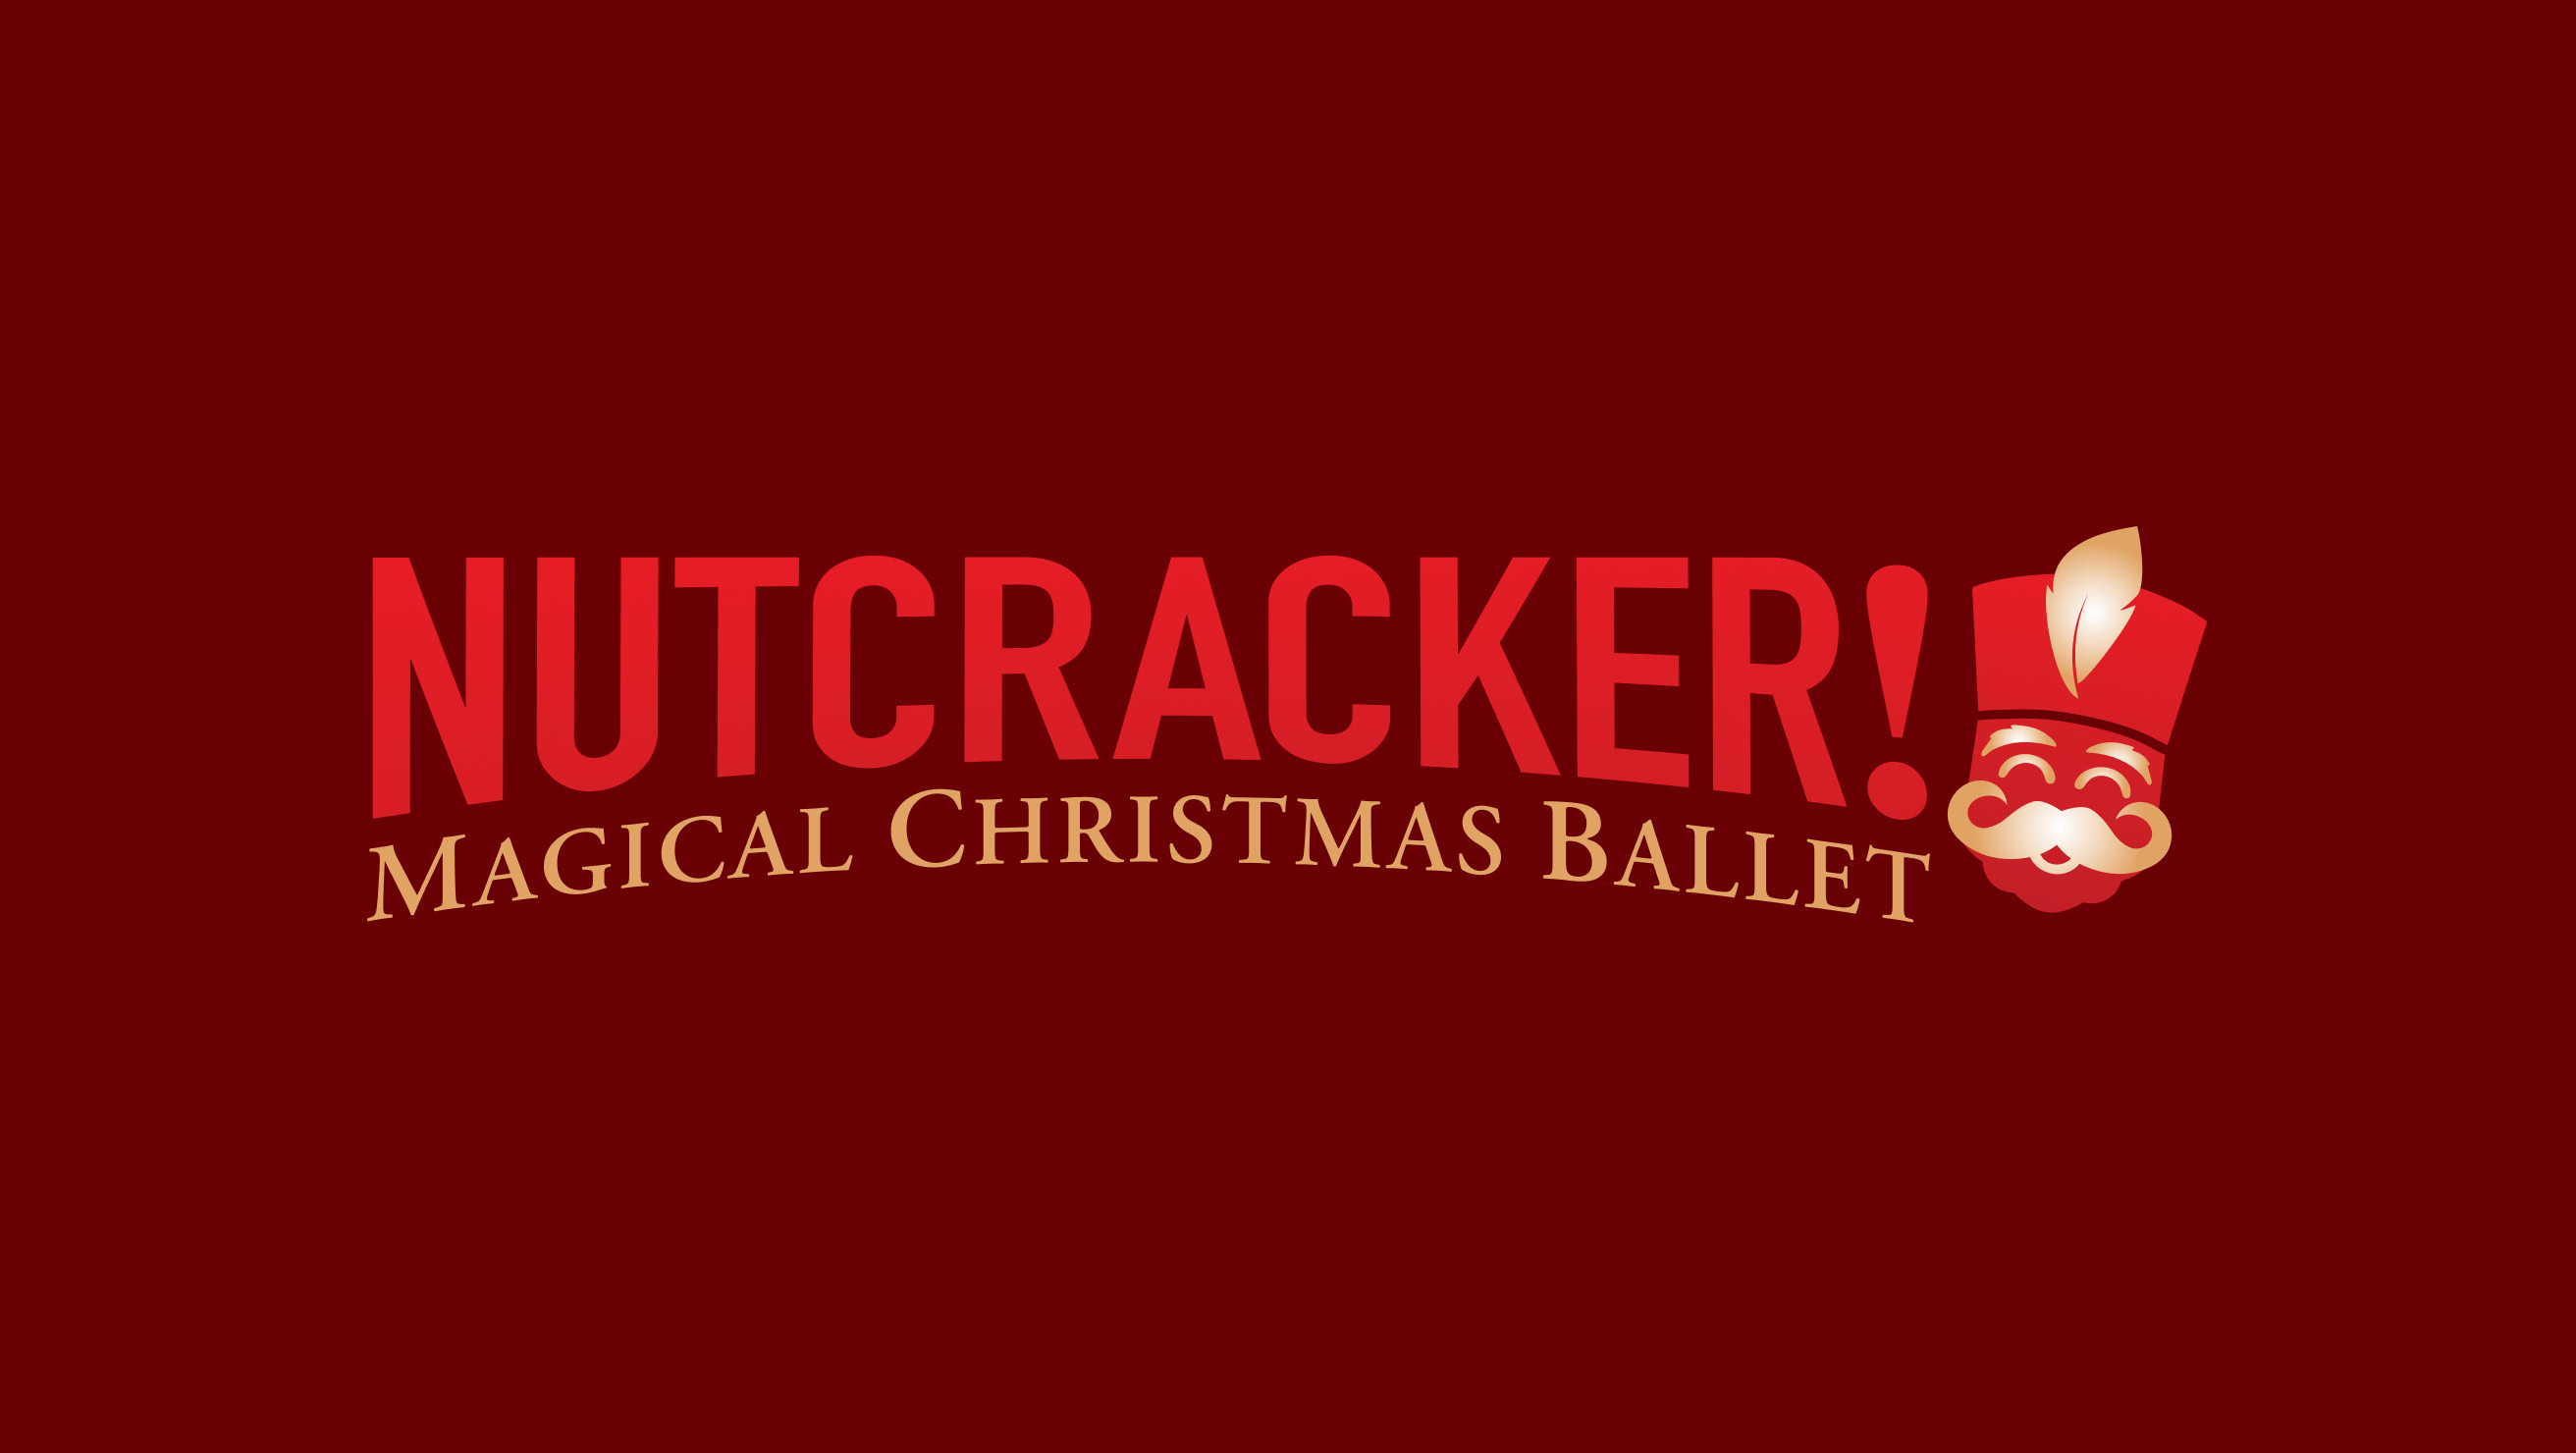 A banner with a maroon background and the text "Nutcracker! Magical Christmas Ballet" next to a logo of a nutcracker head.